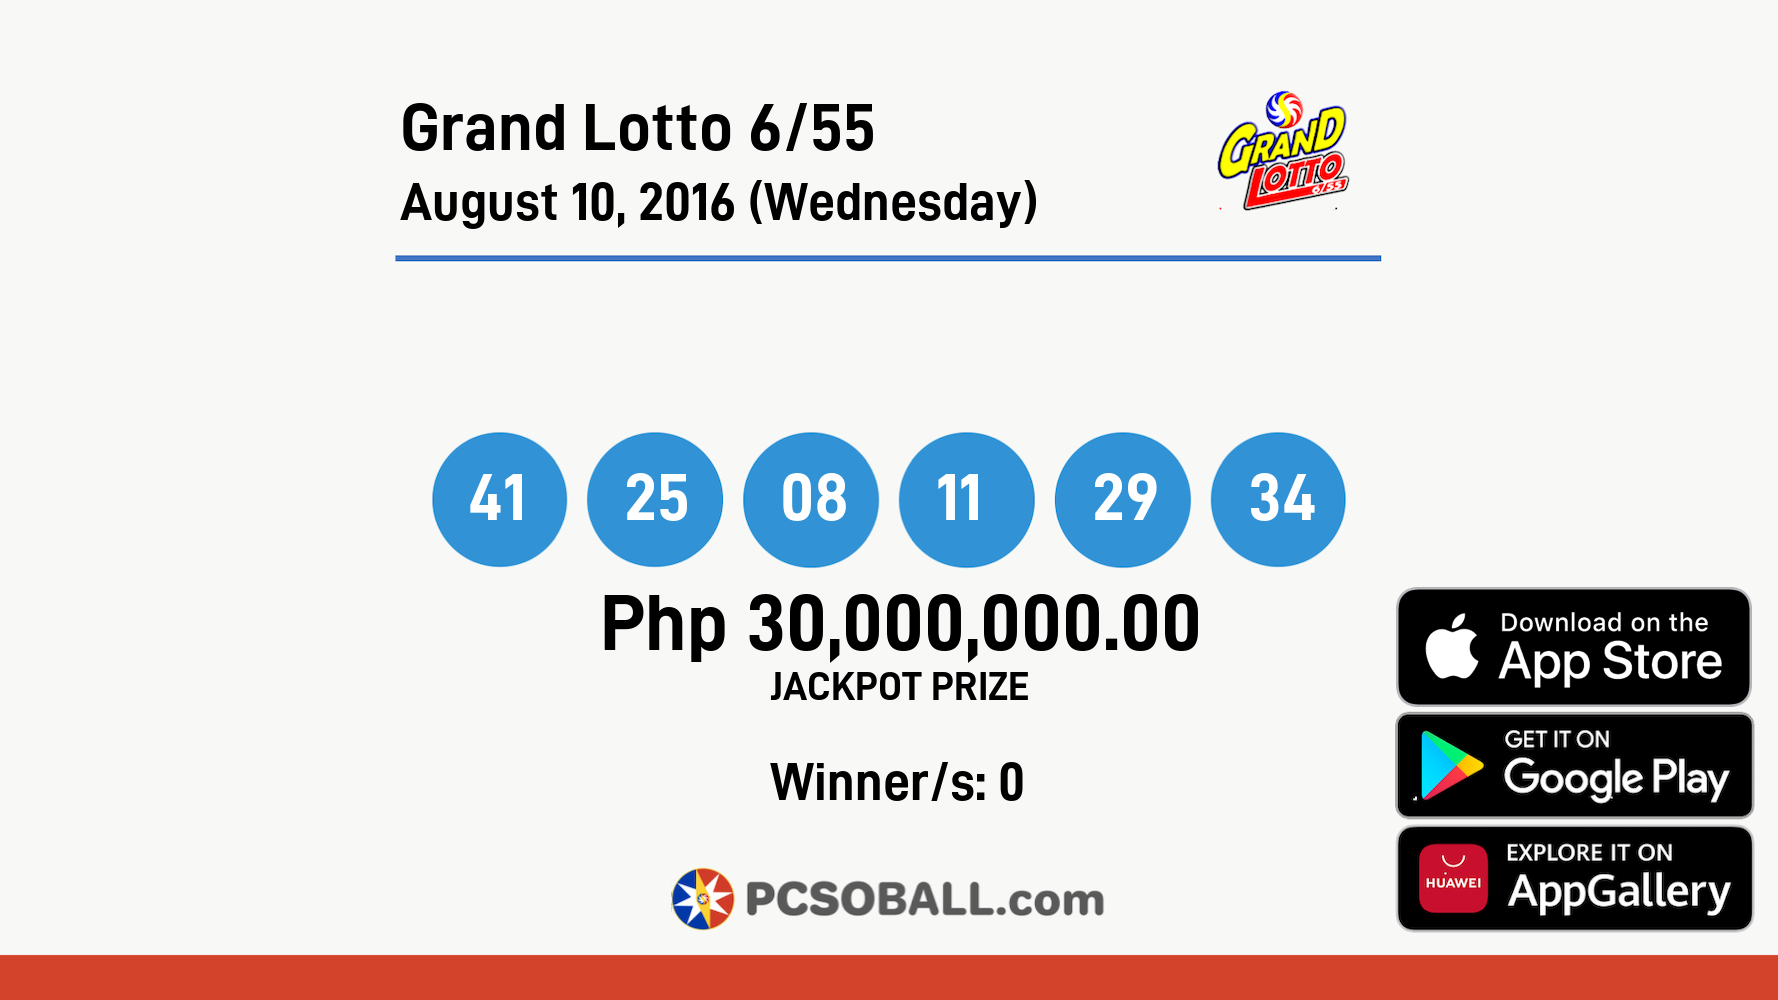 Grand Lotto 6/55 August 10, 2016 (Wednesday) Result